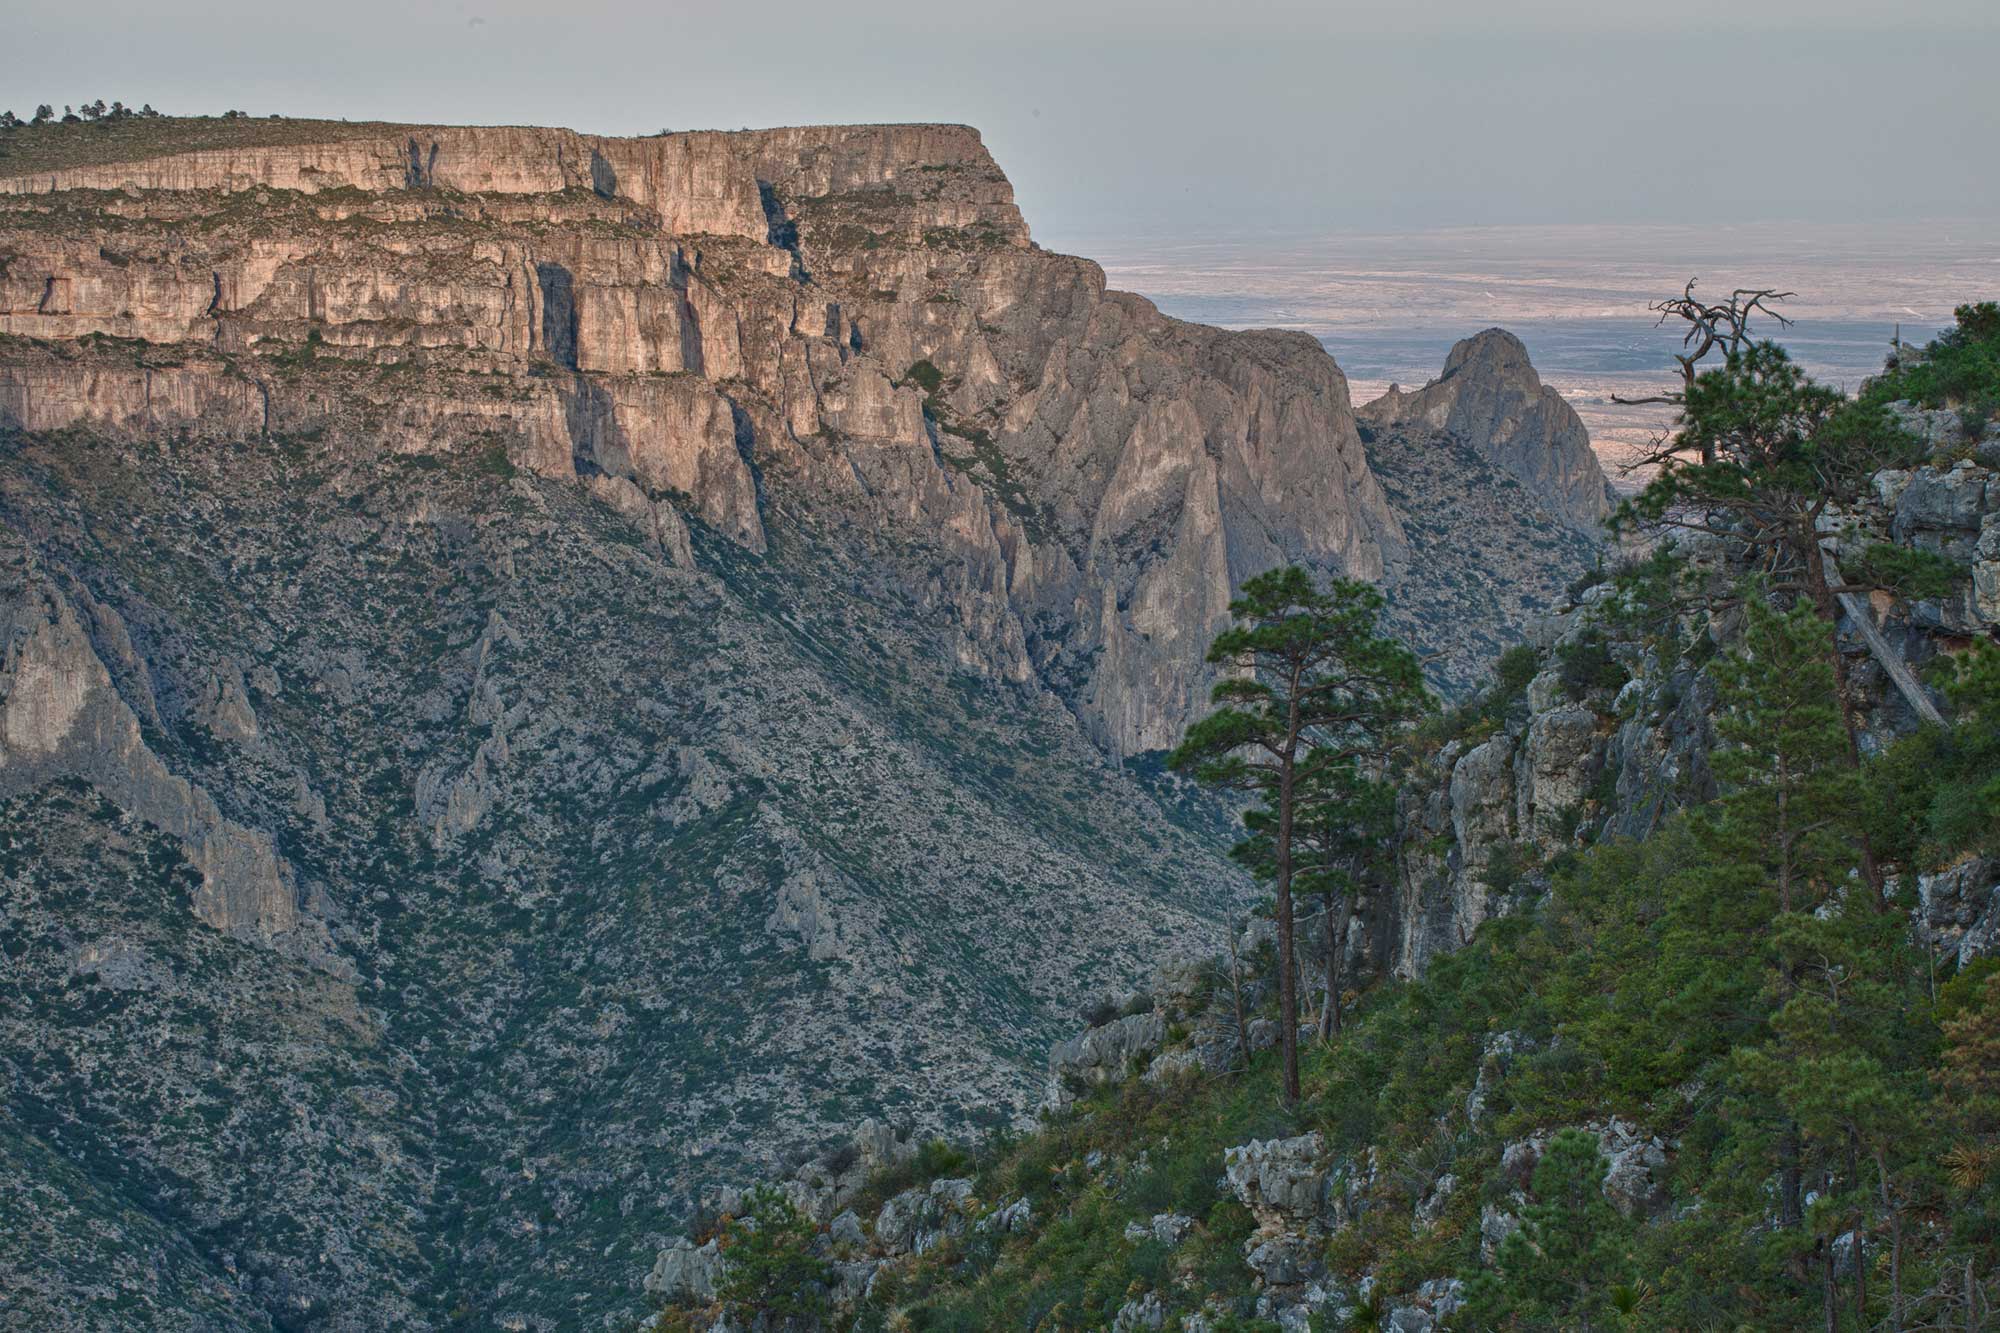 Photograph of Lonesome Ridge in southern New Mexico. The image shows a mountain slop capped by thick cliffs. The area is clearly arid, as vegetation is relatively spare and bare ground can be seen between shrubs or trees.